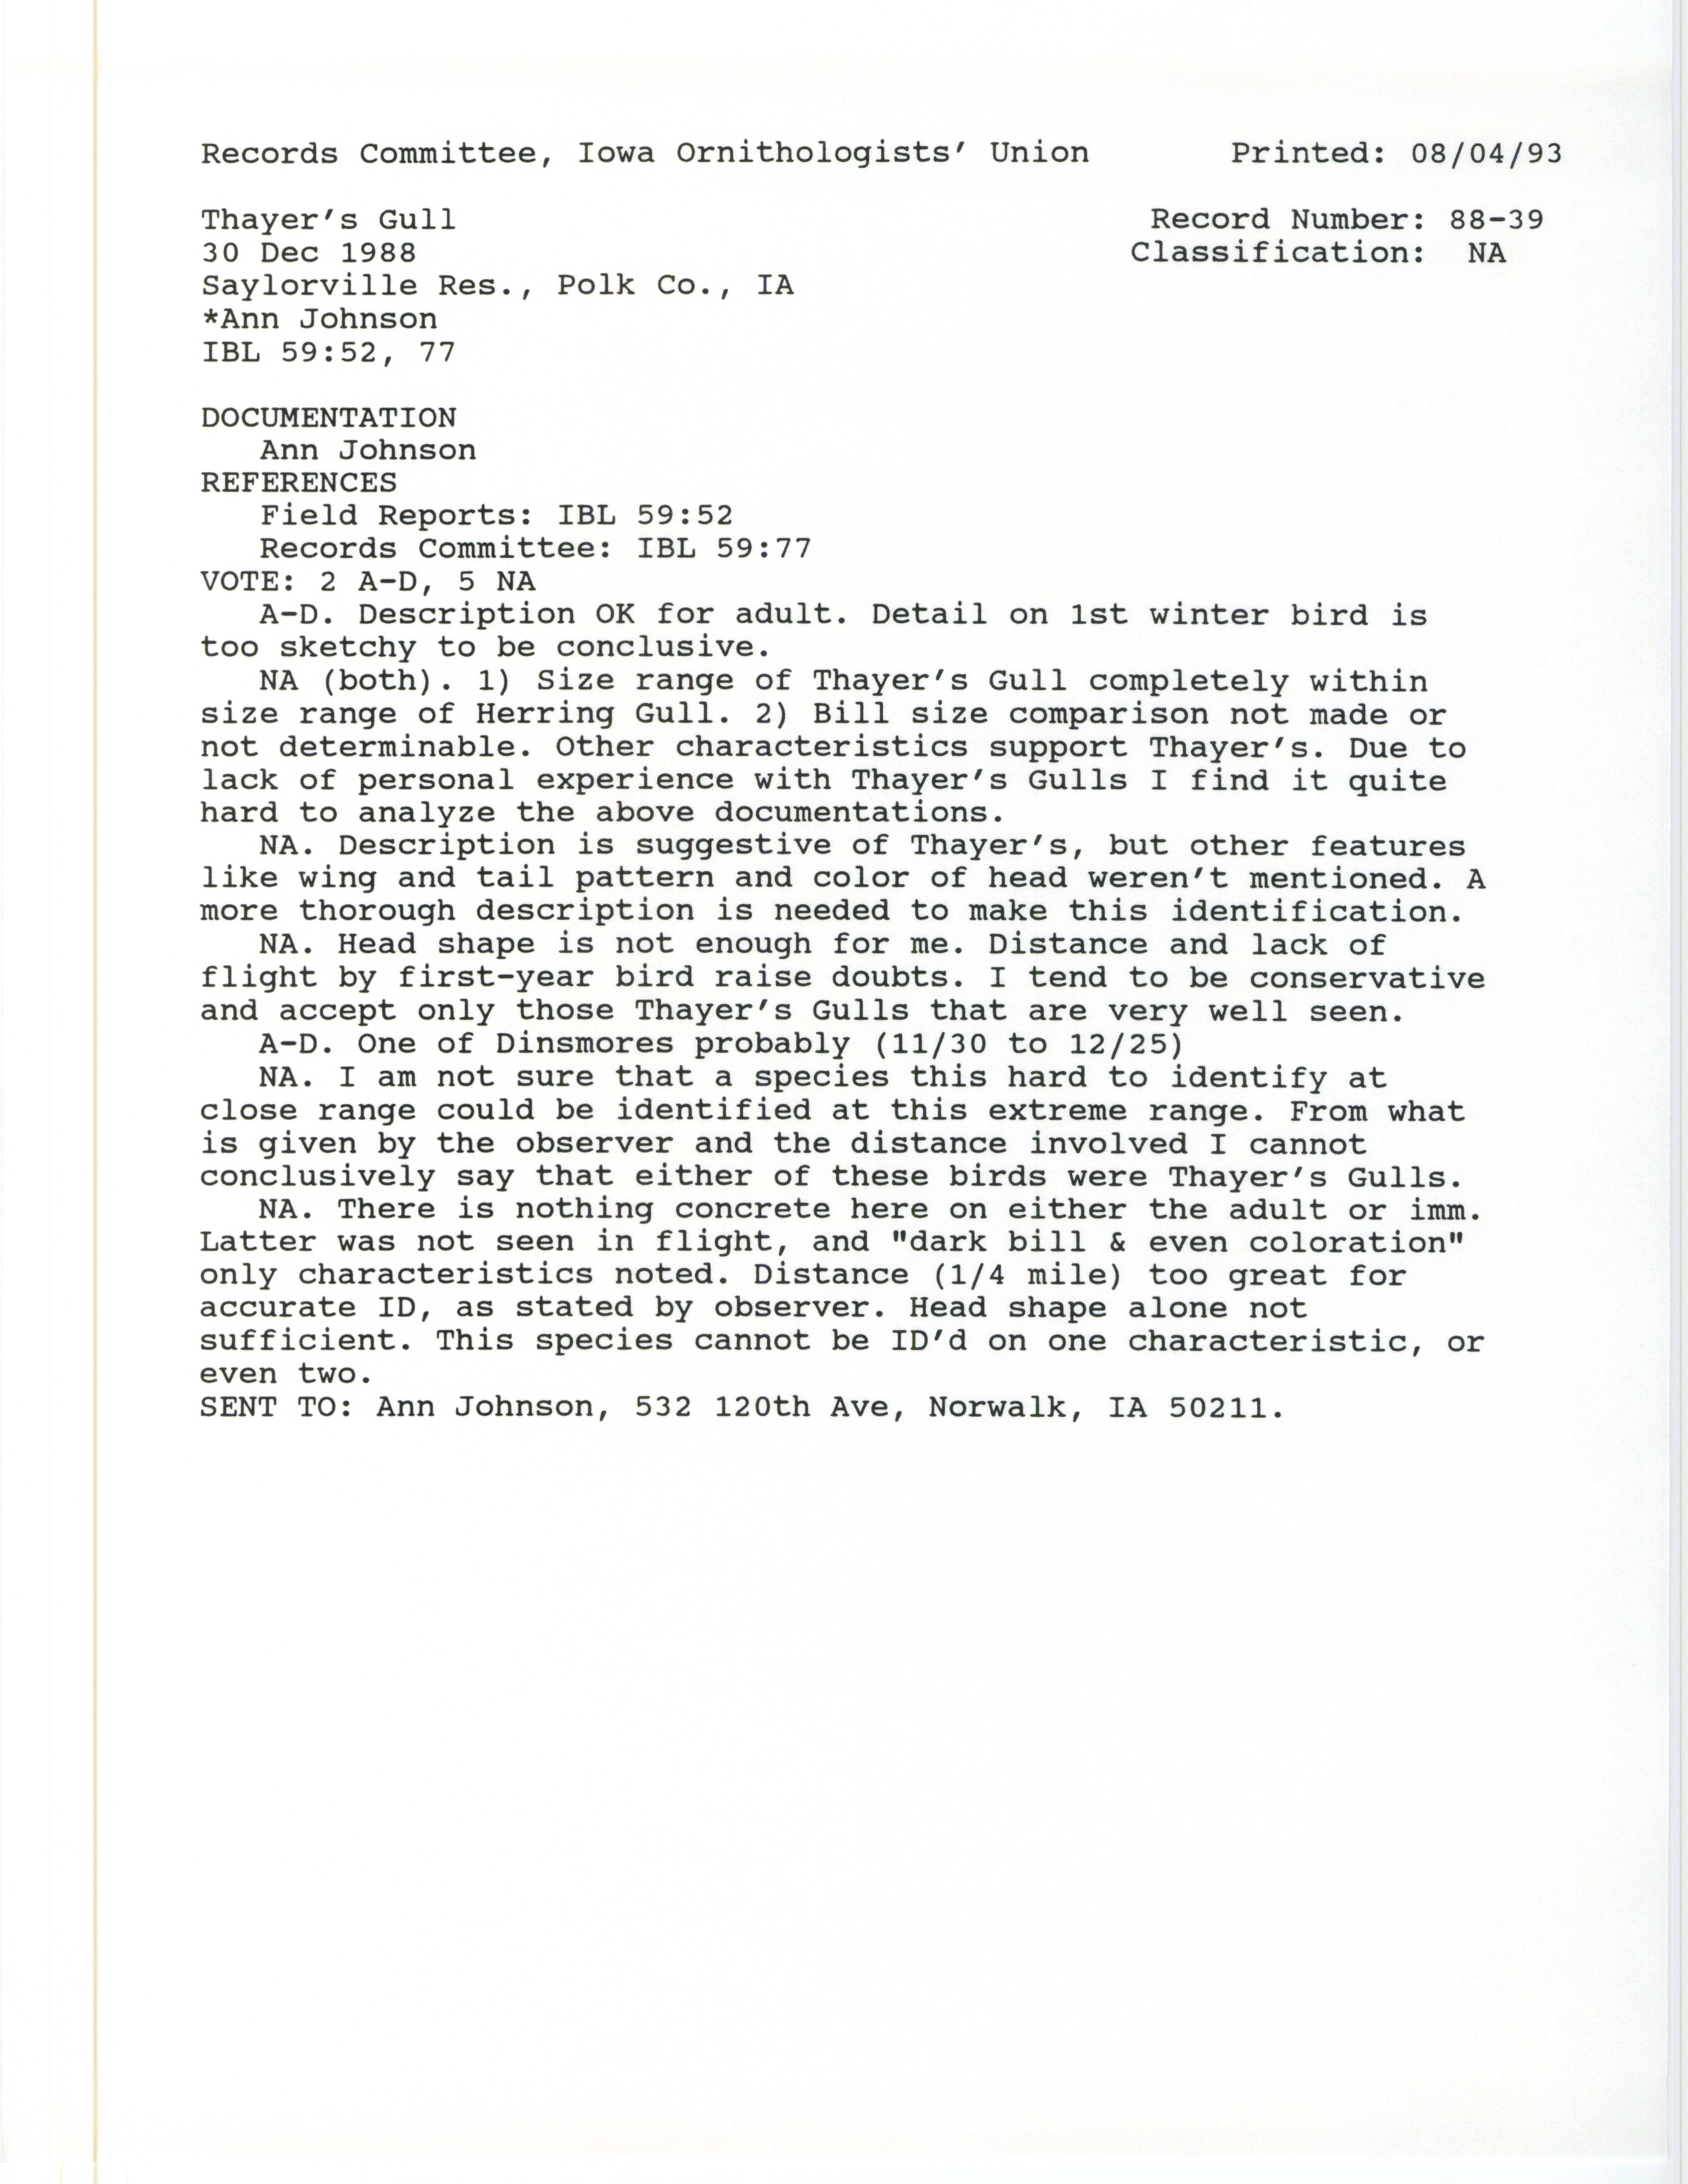 Records Committee review for rare bird sighting of Thayer's Gull at Saylorville Dam, 1988